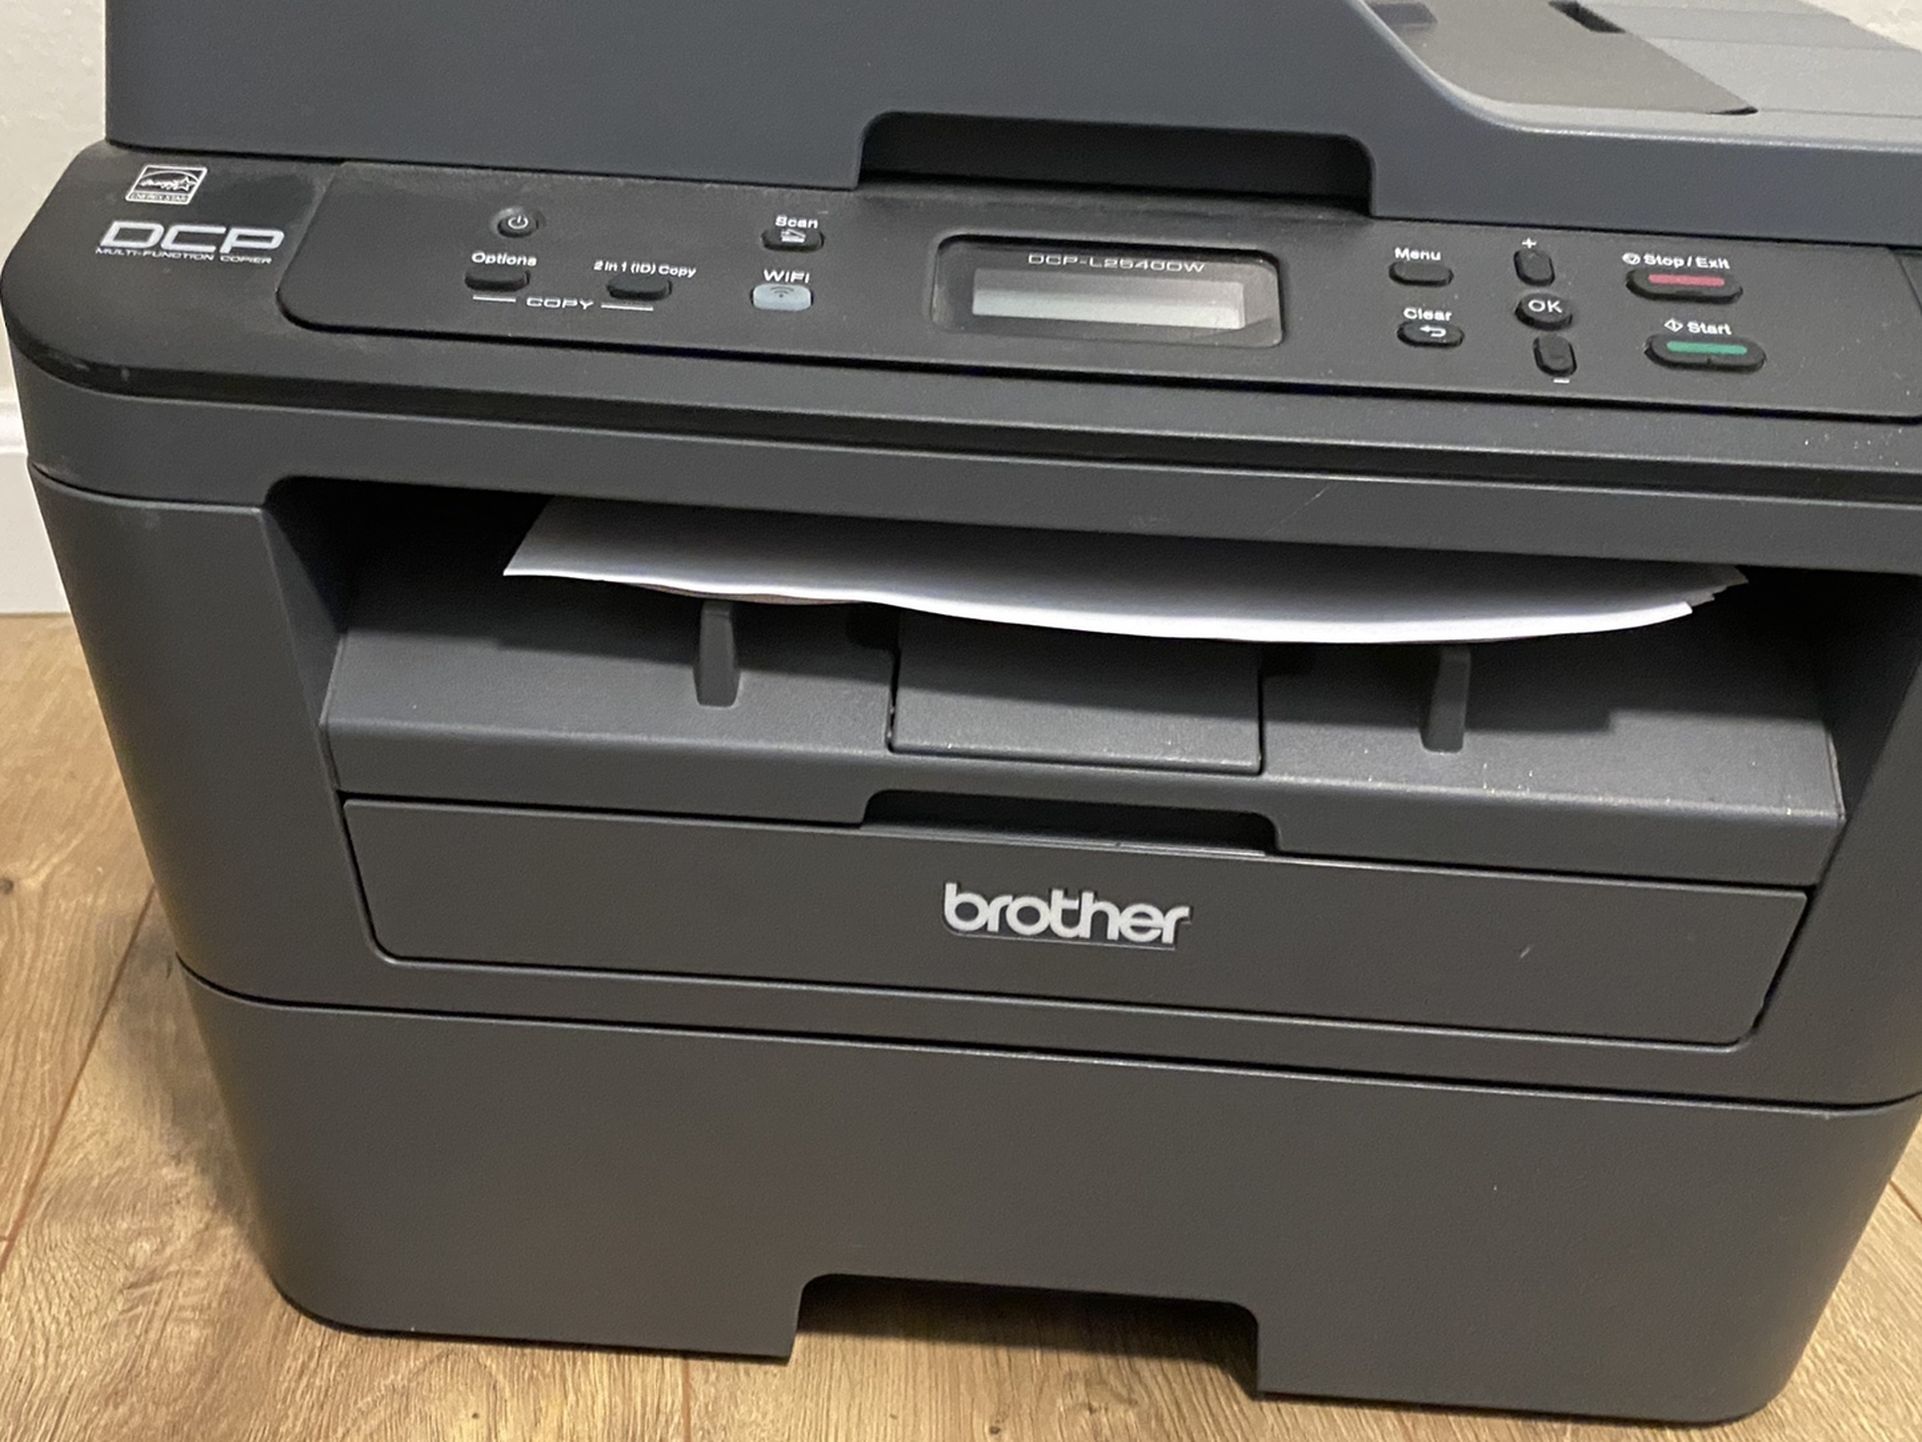 Brother DCP-L2540DW Monochrome Laser - Multifunction printer